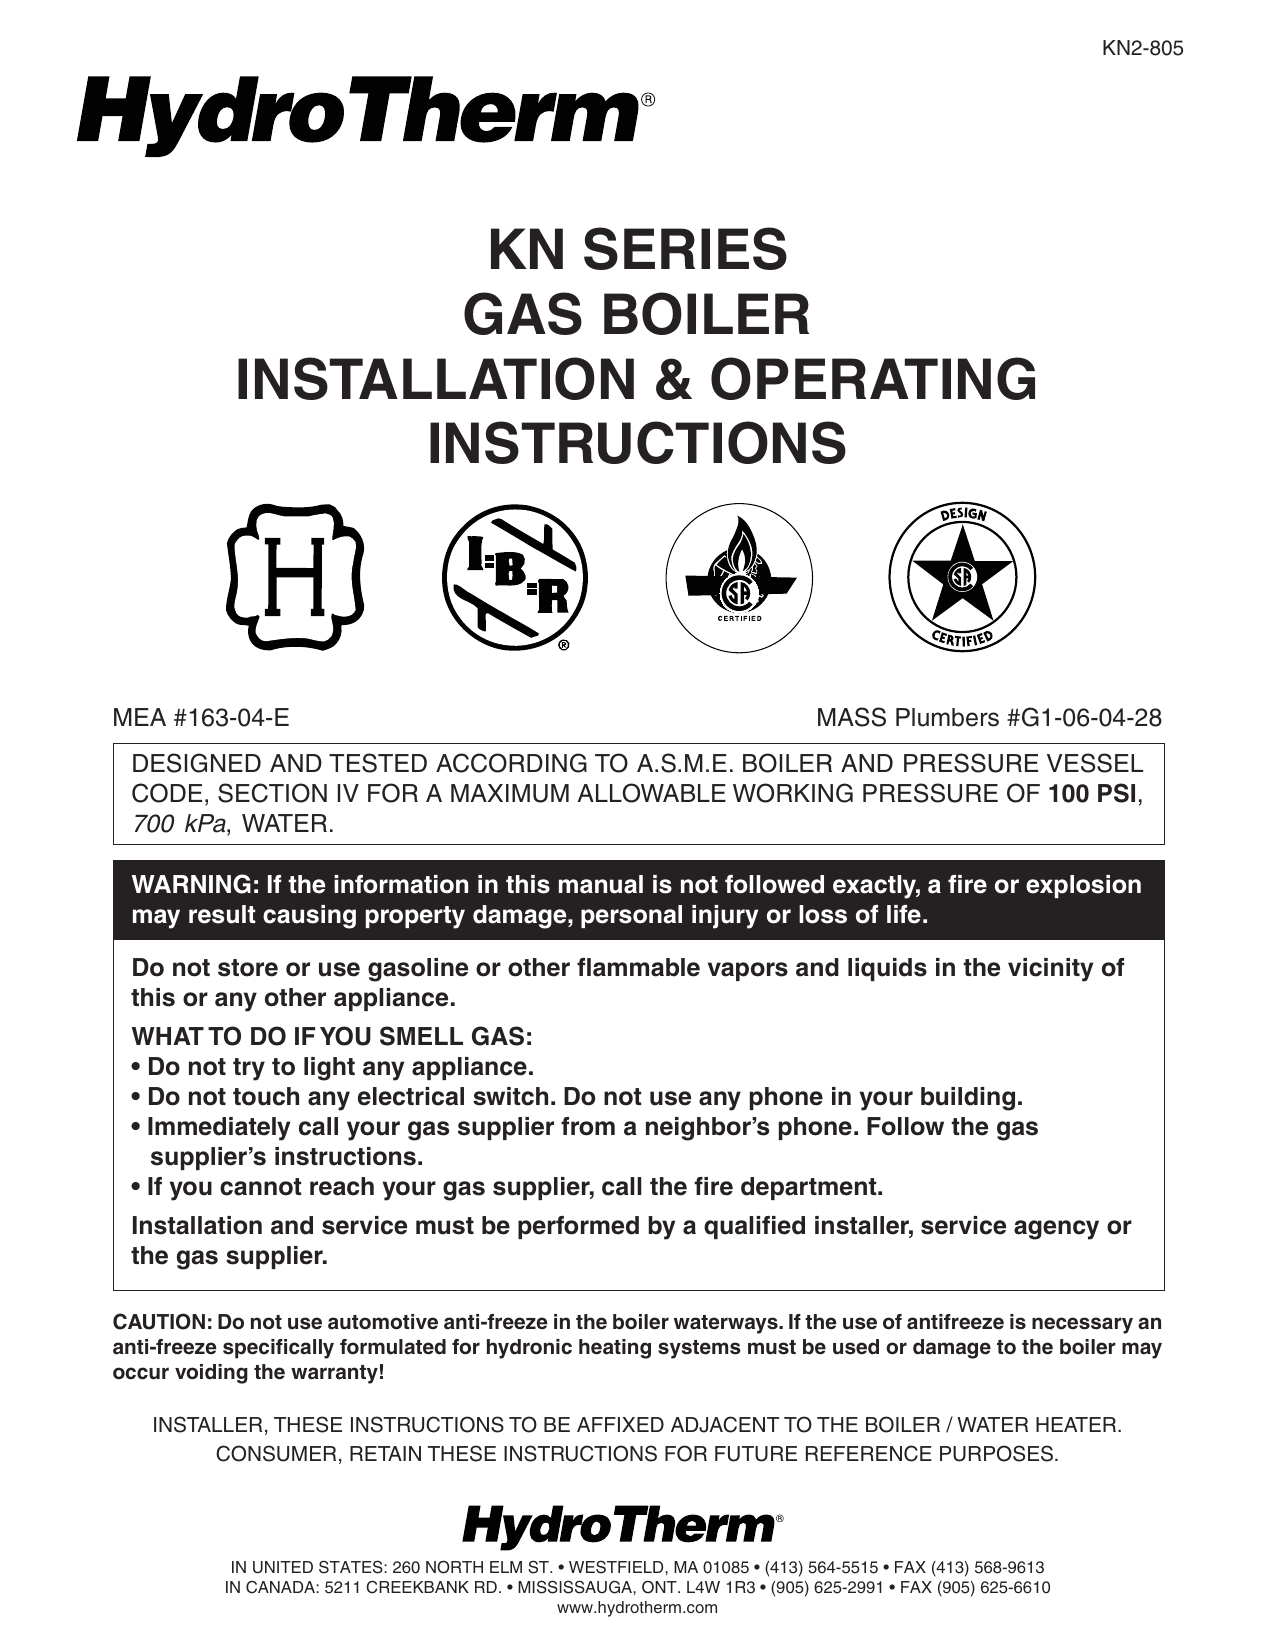 operating instructions kn series gas boiler installation operating instructions